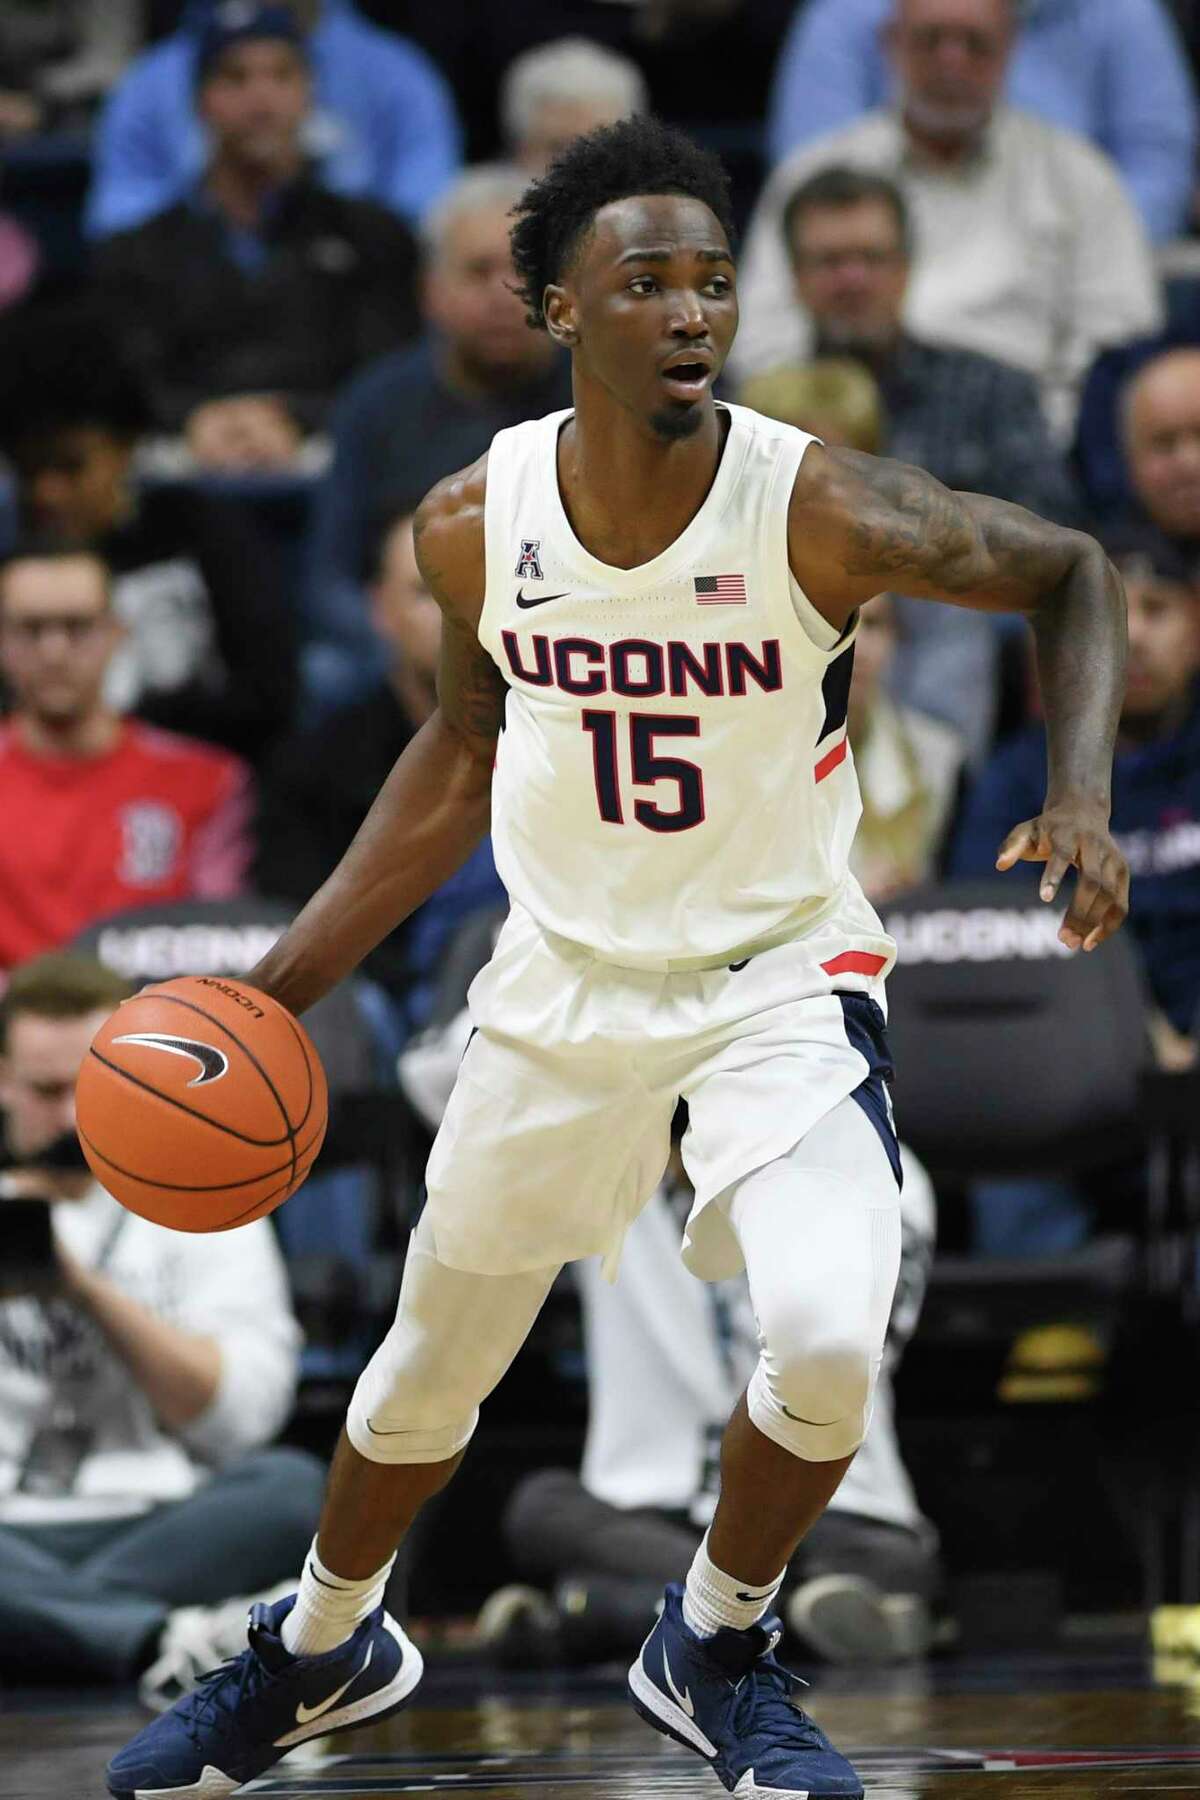 Connecticut's Sidney Wilson in the first half of an NCAA college basketball game, Wednesday, Dec. 4, 2019, in Storrs, Conn. (AP Photo/Jessica Hill)